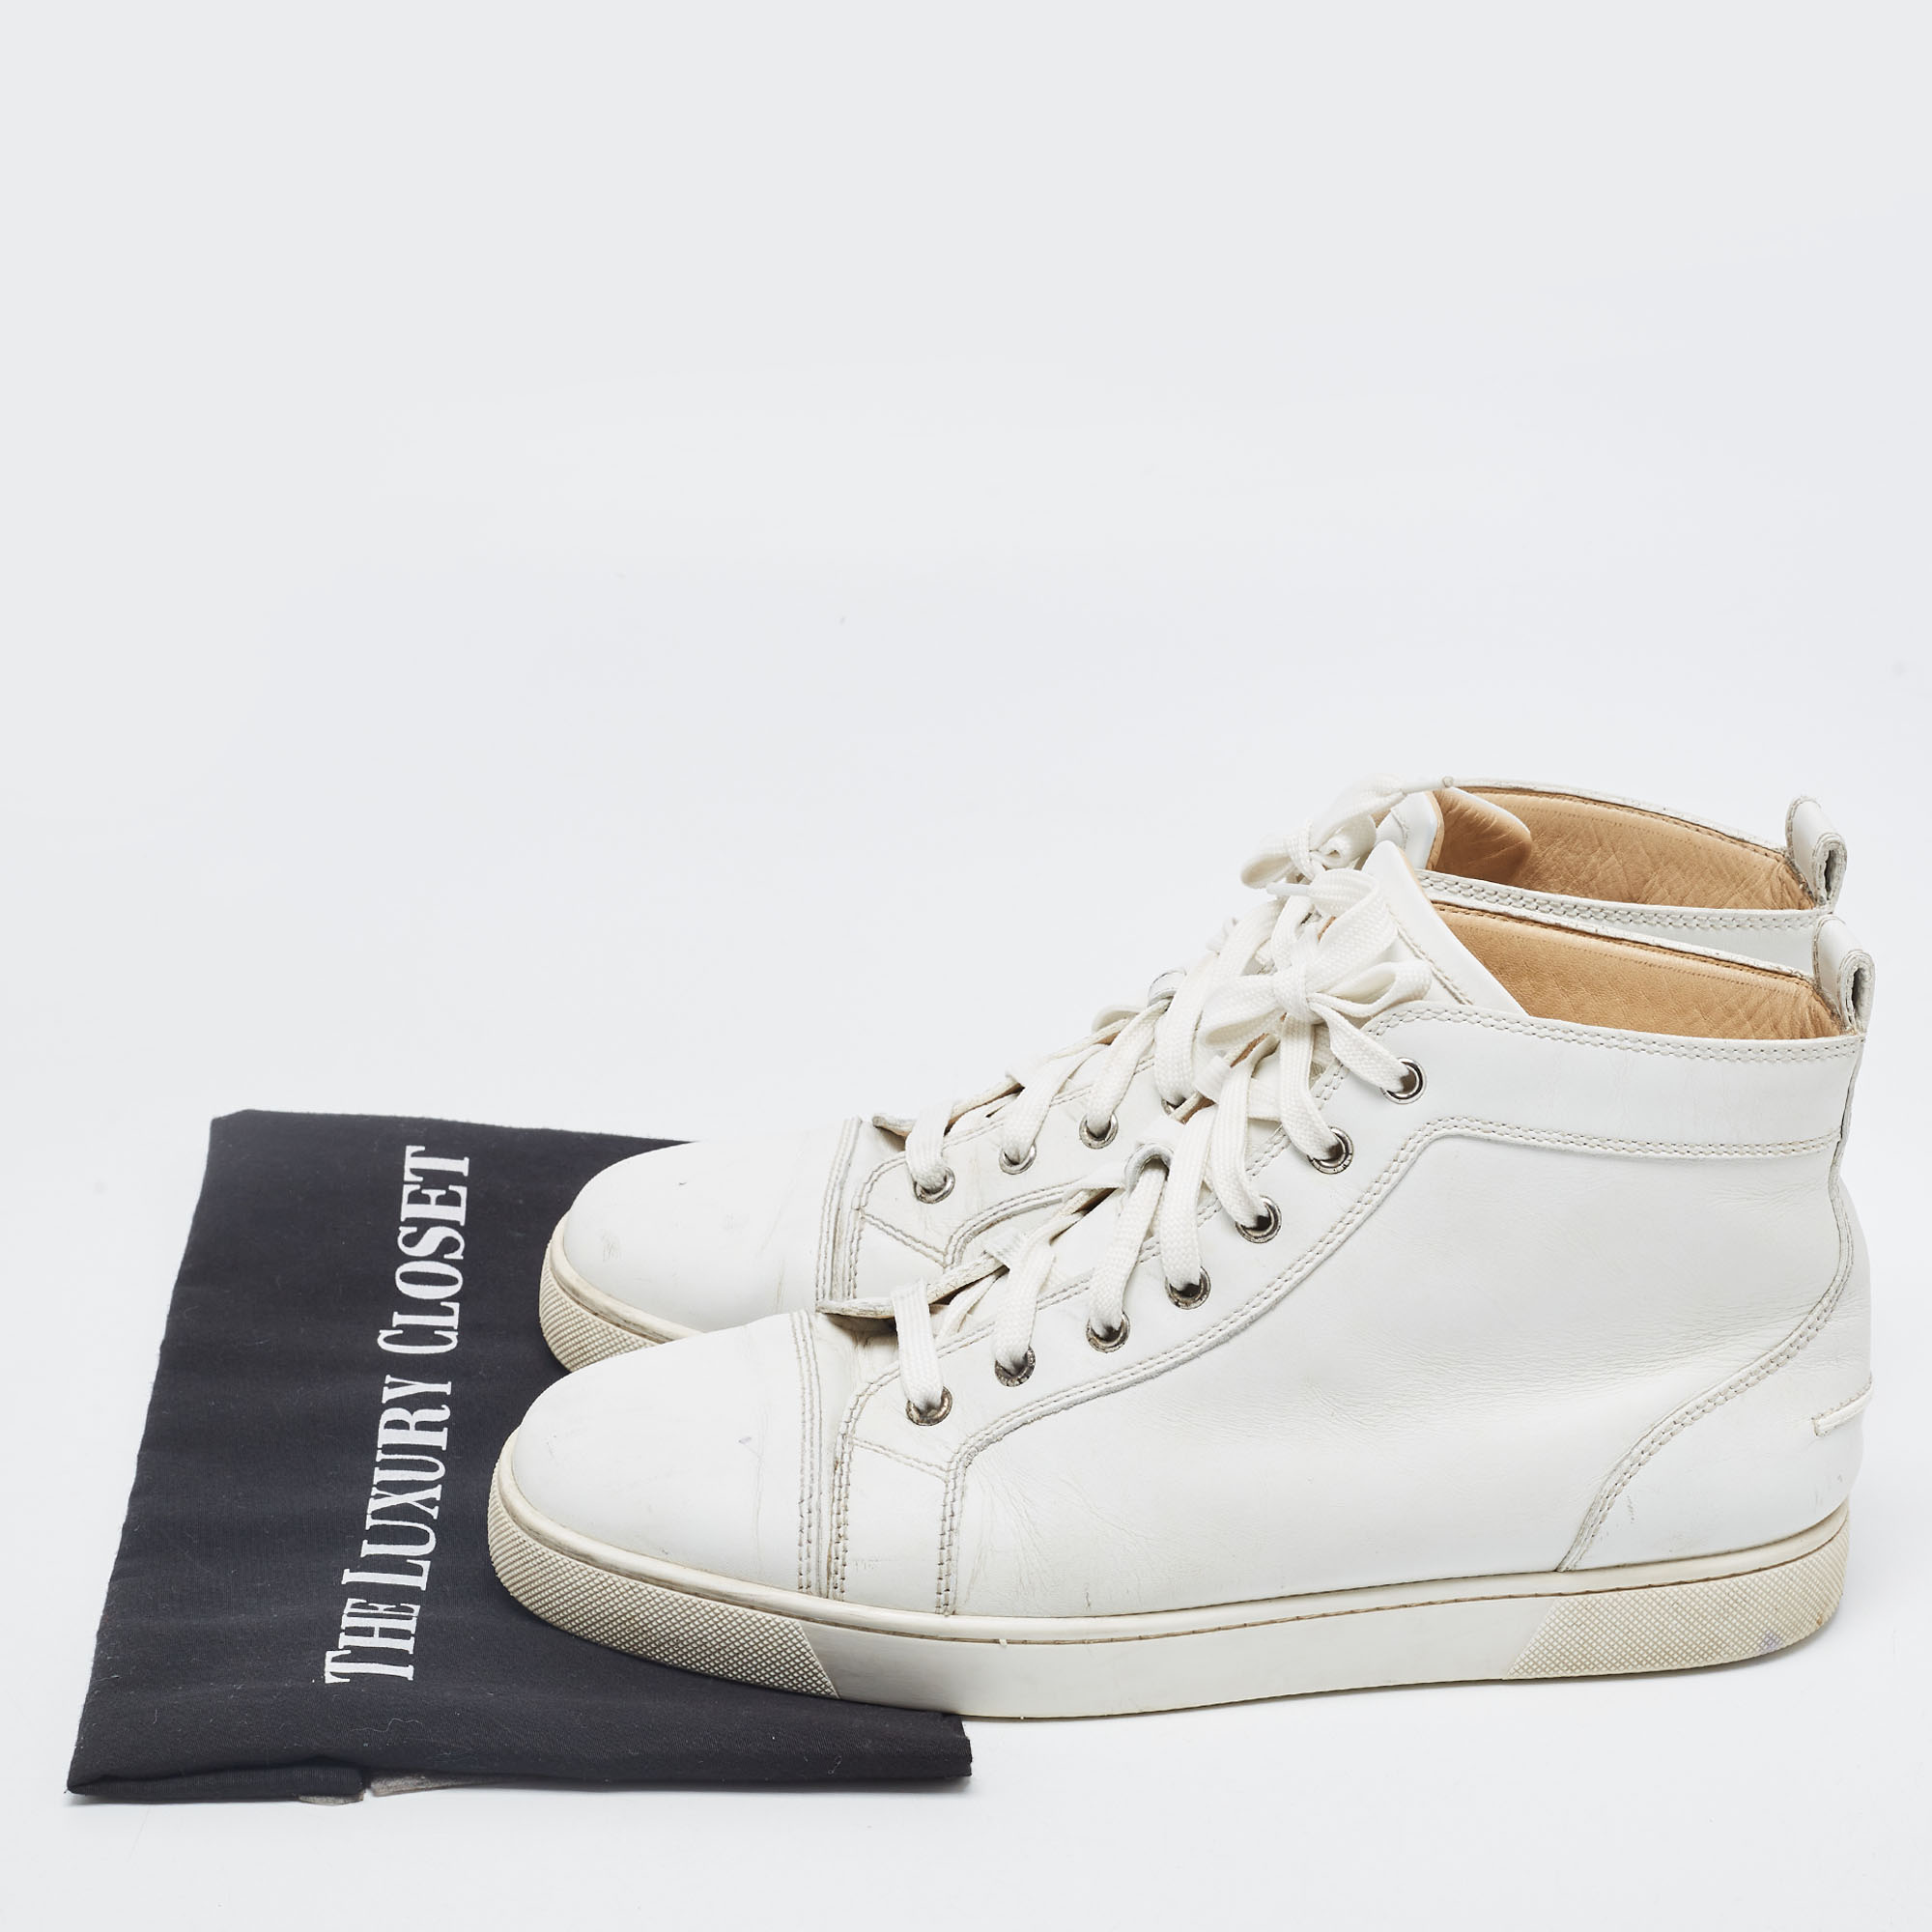 Christian Louboutin White Leather Louis High Top Sneakers Size 43